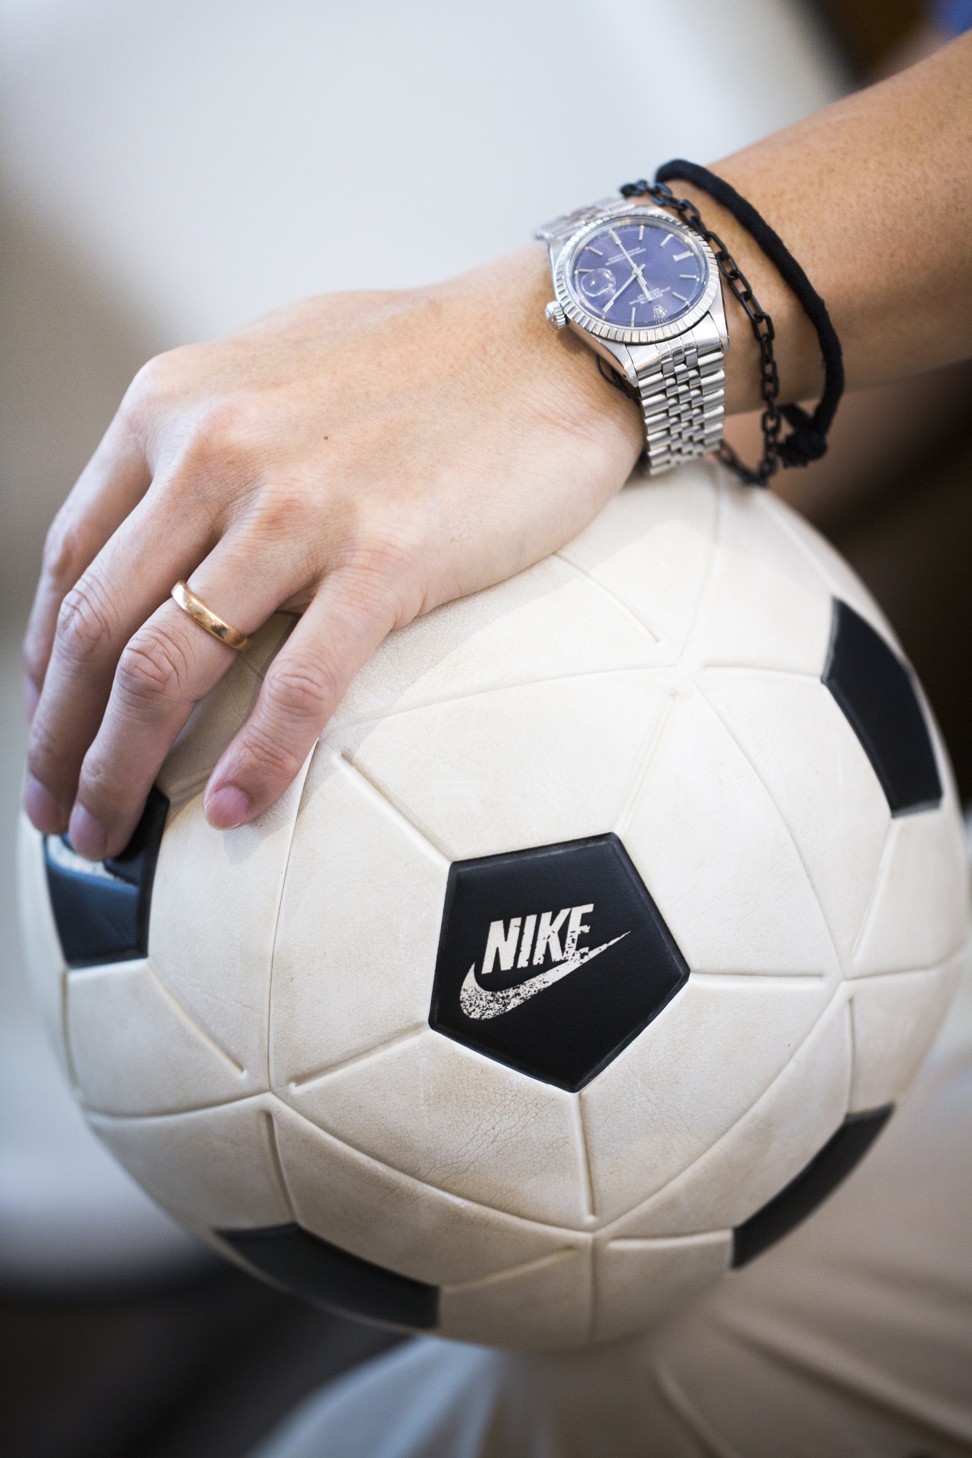 Lau’s vintage Rolex watch, and his Off-White x Nike soccer ball. Photo: Michelle Wong